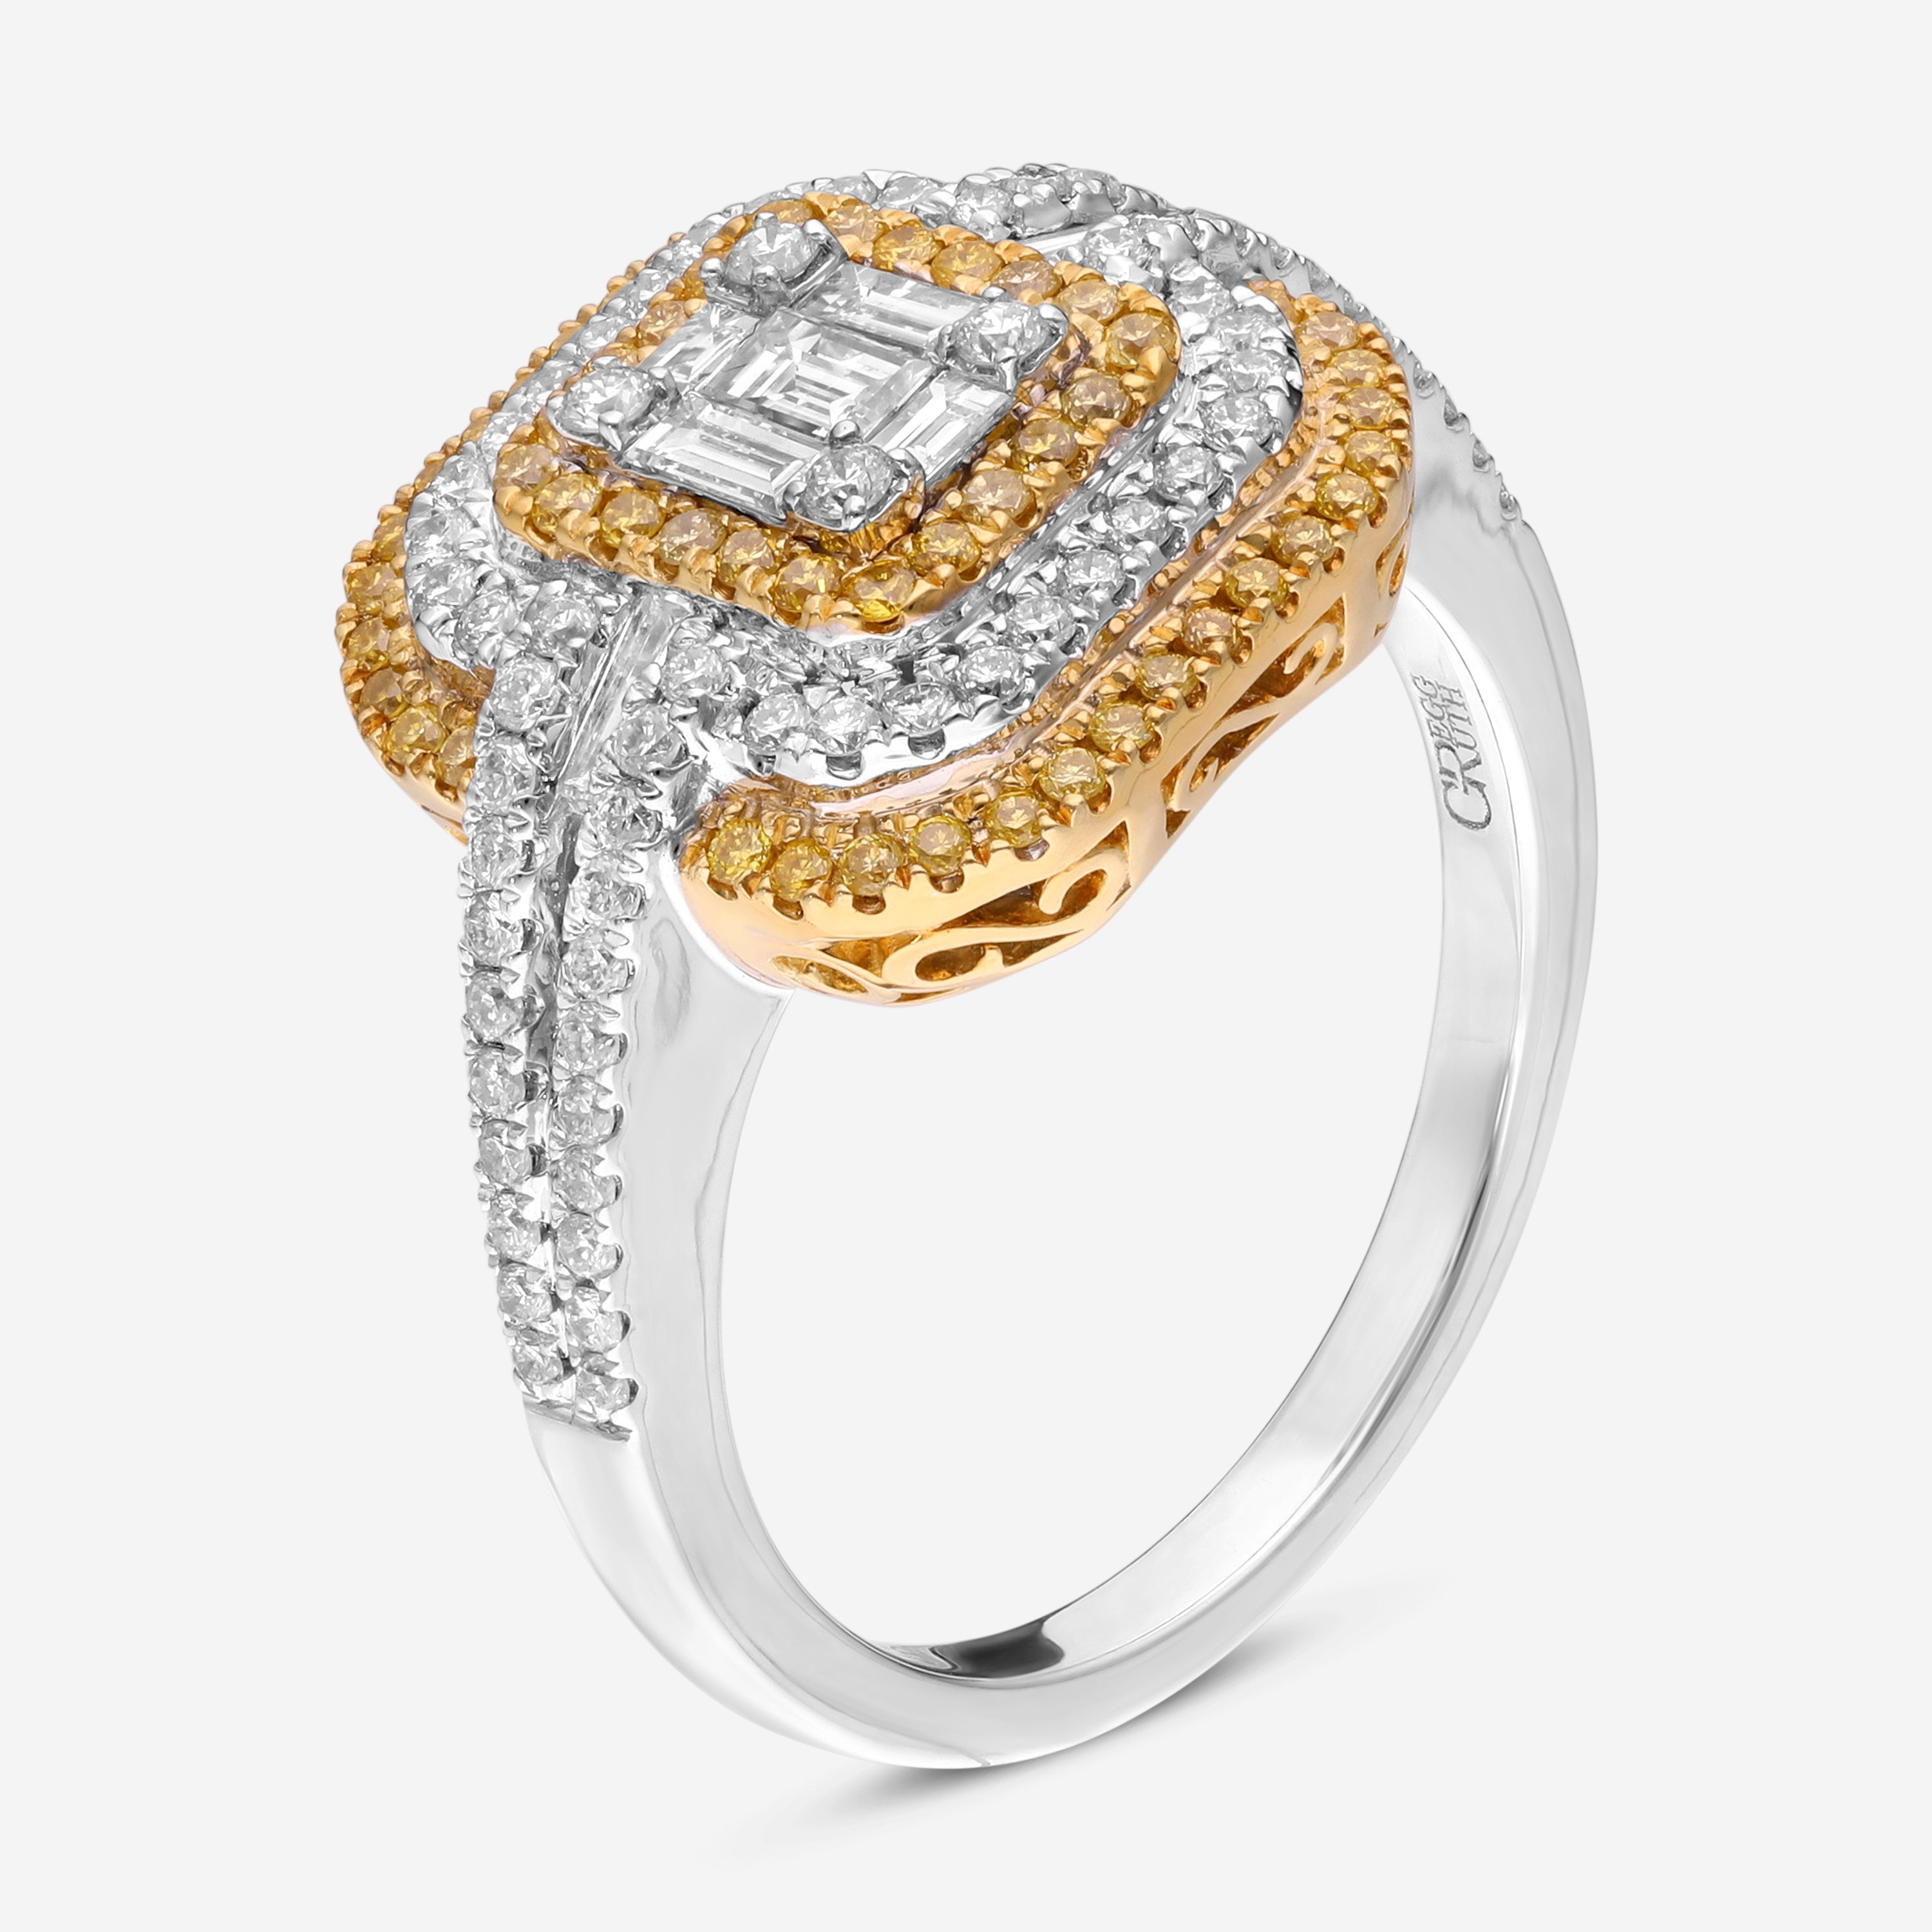 Gregg Ruth 18K White and Yellow Gold, Diamond and Fancy Yellow Diamond Engagement Ring 047201 - GCR/000934 - THE SOLIST